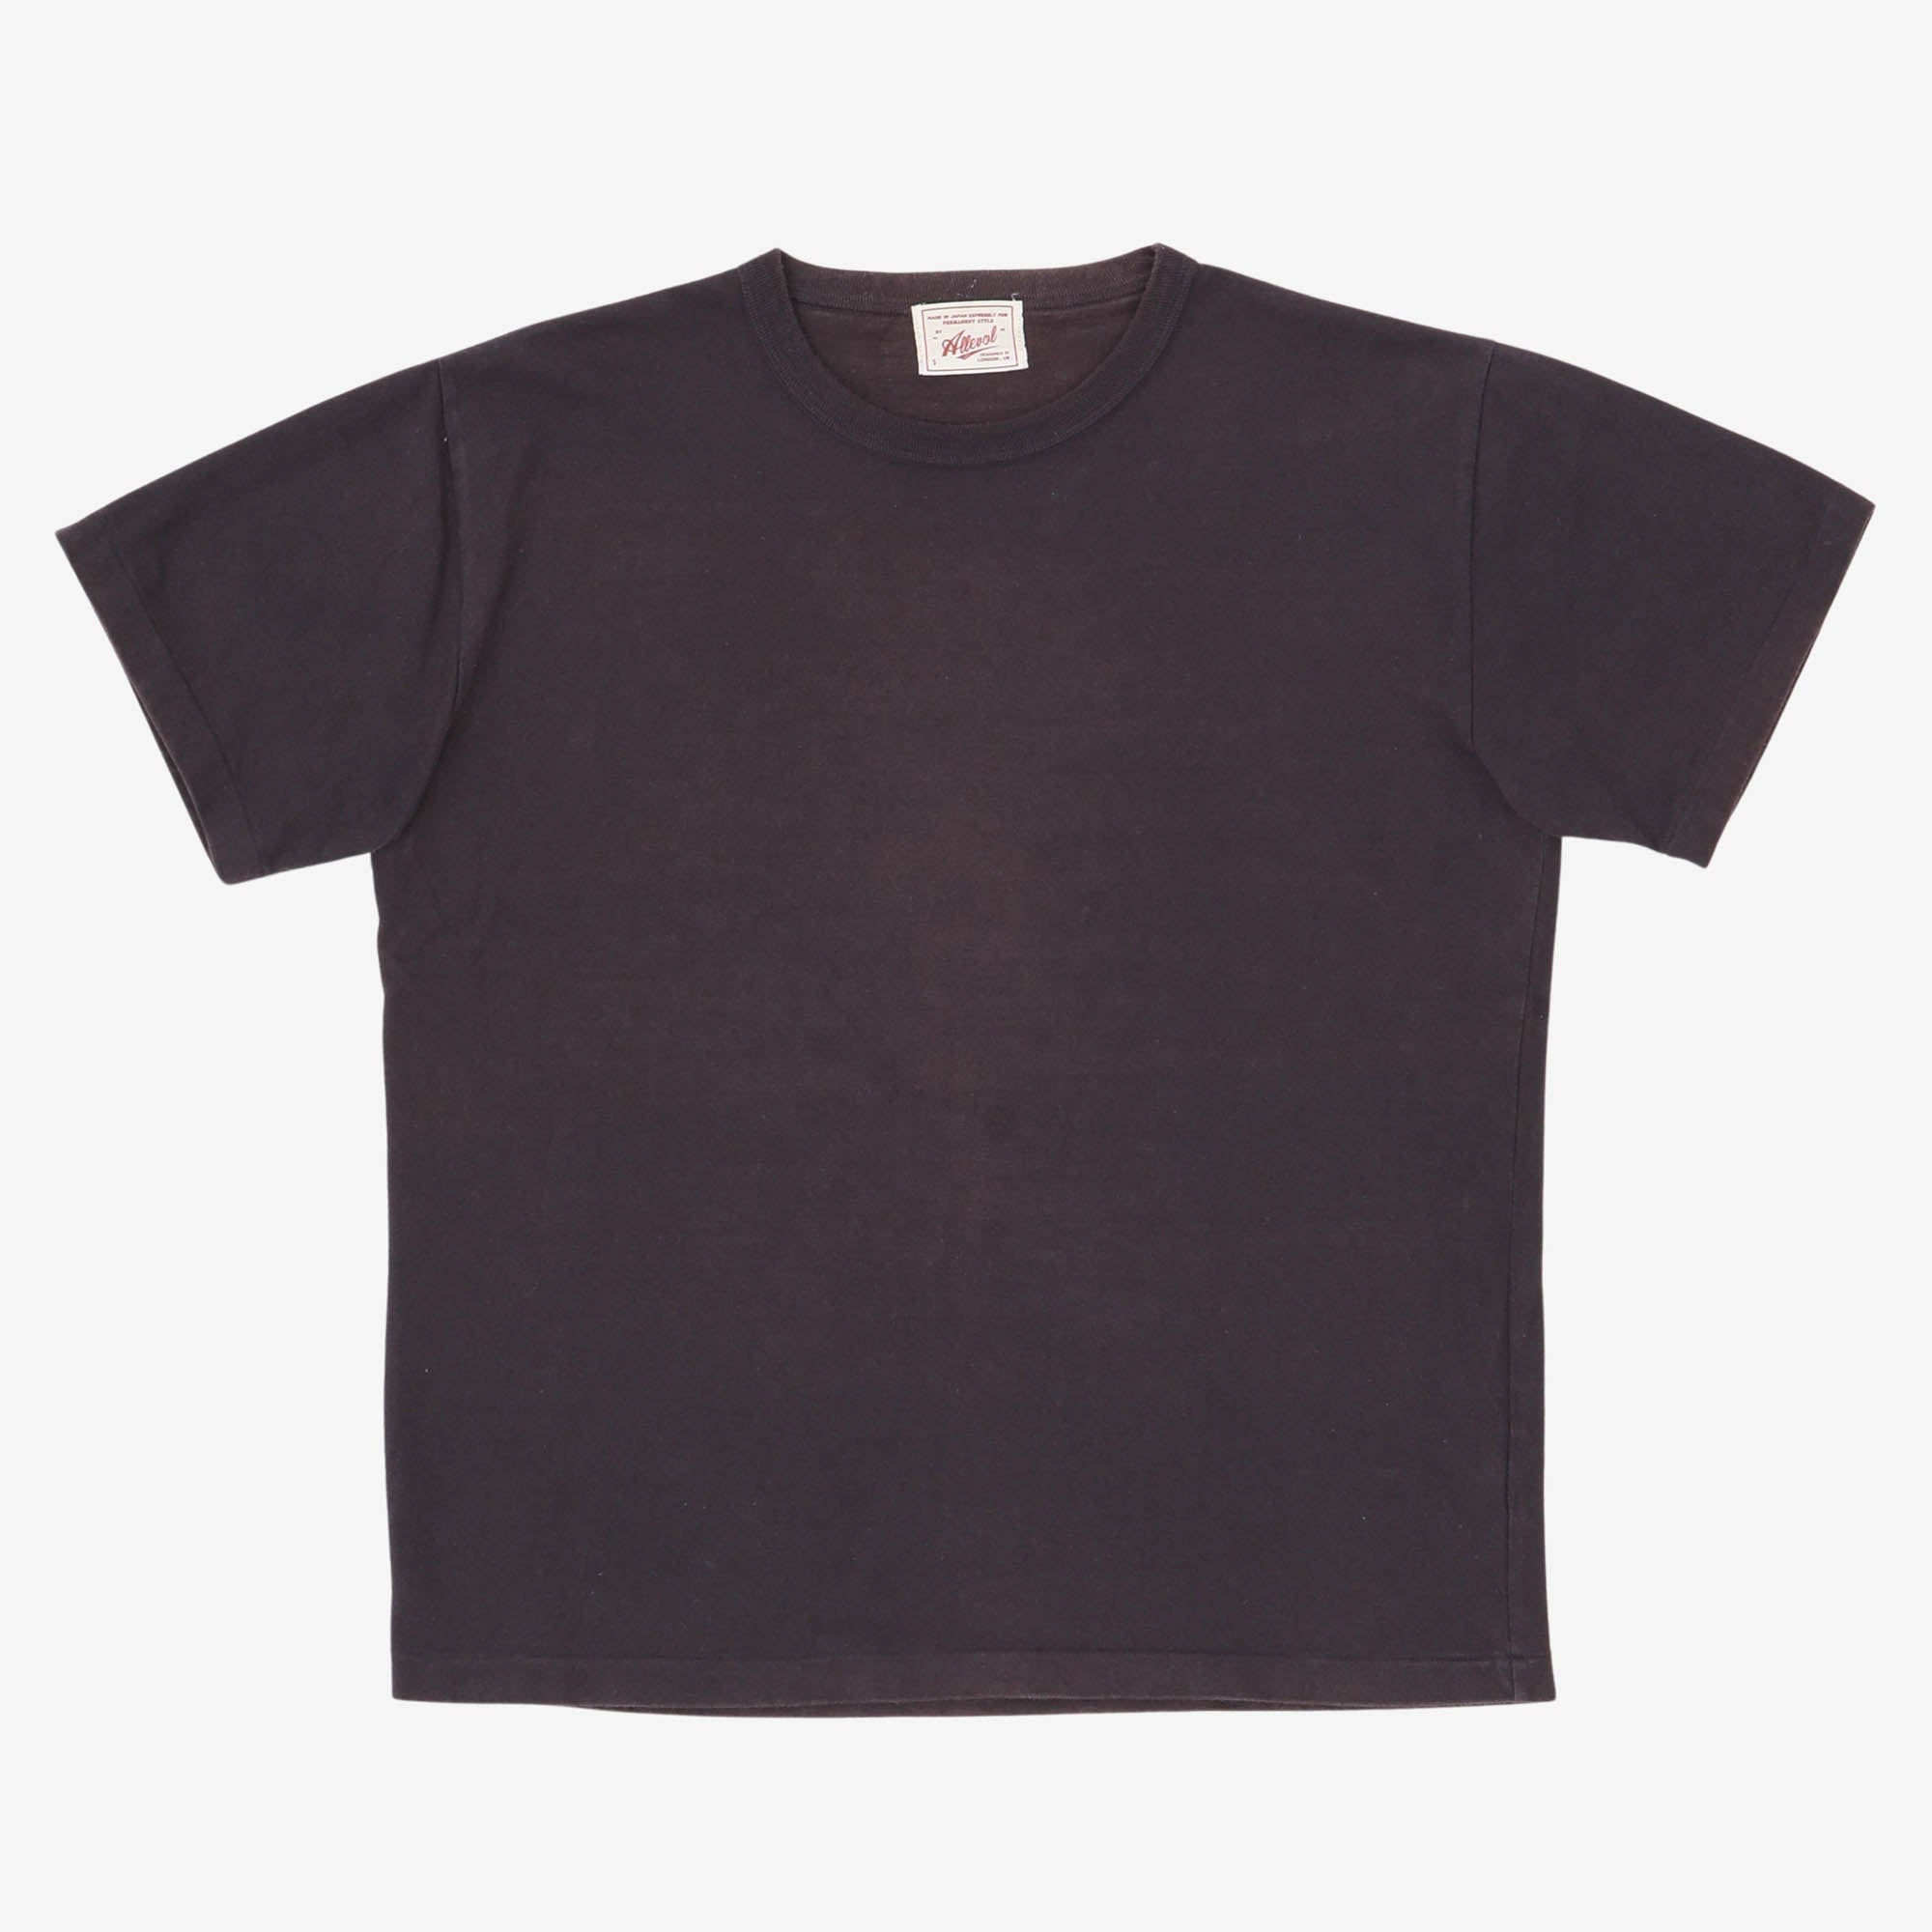 The PS Tapered T-Shirt